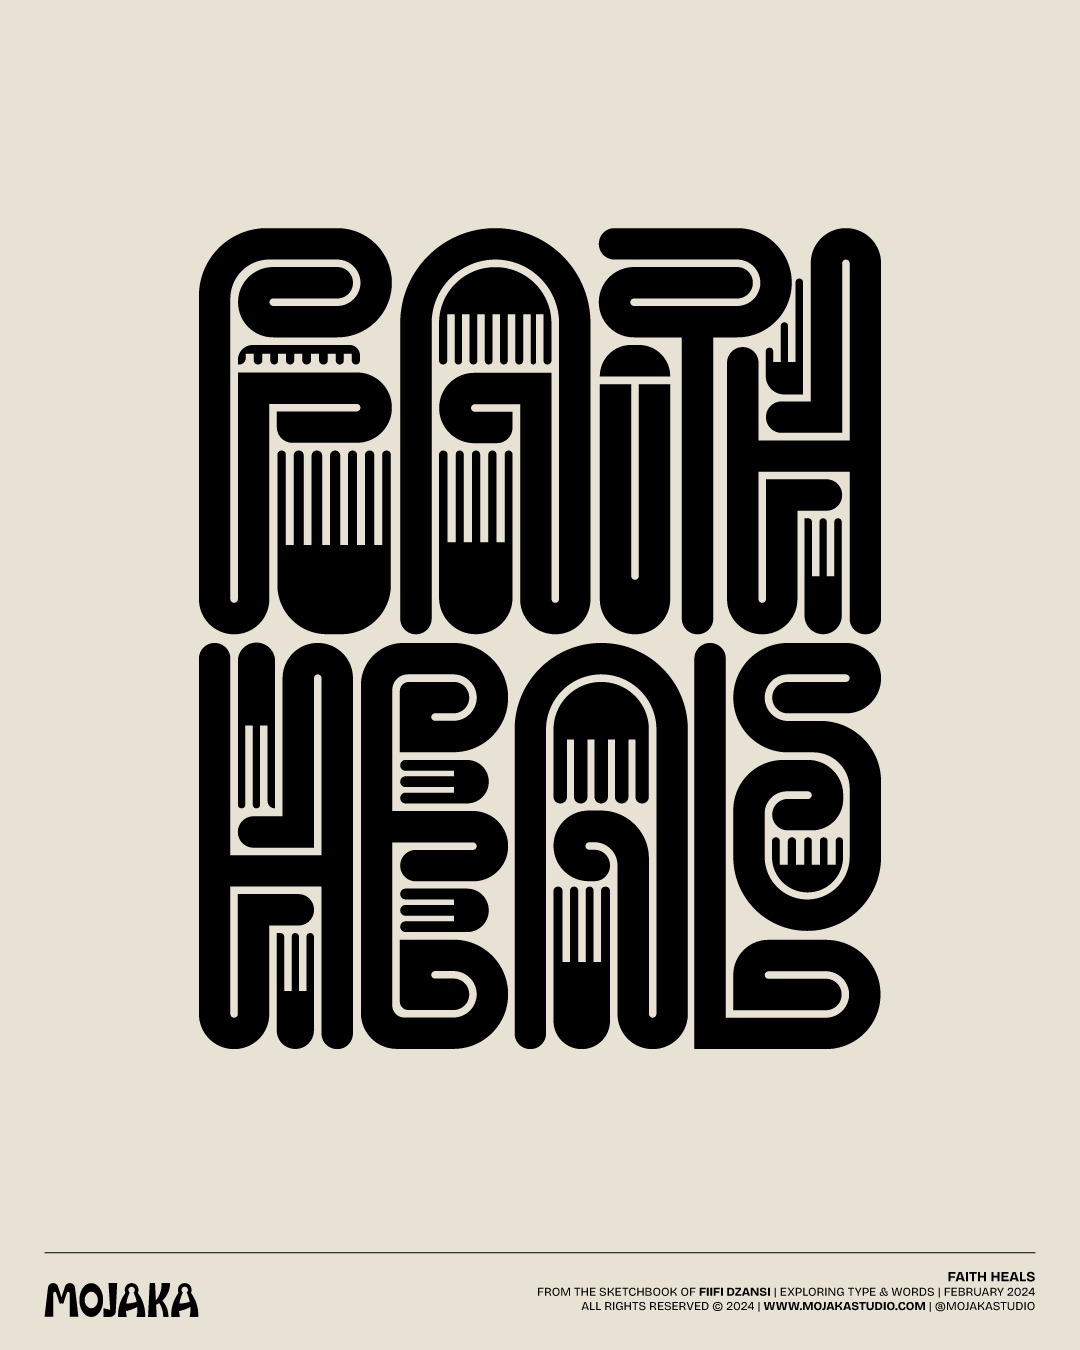 Faith heals type design with patterns of comb in the empty spaces in black